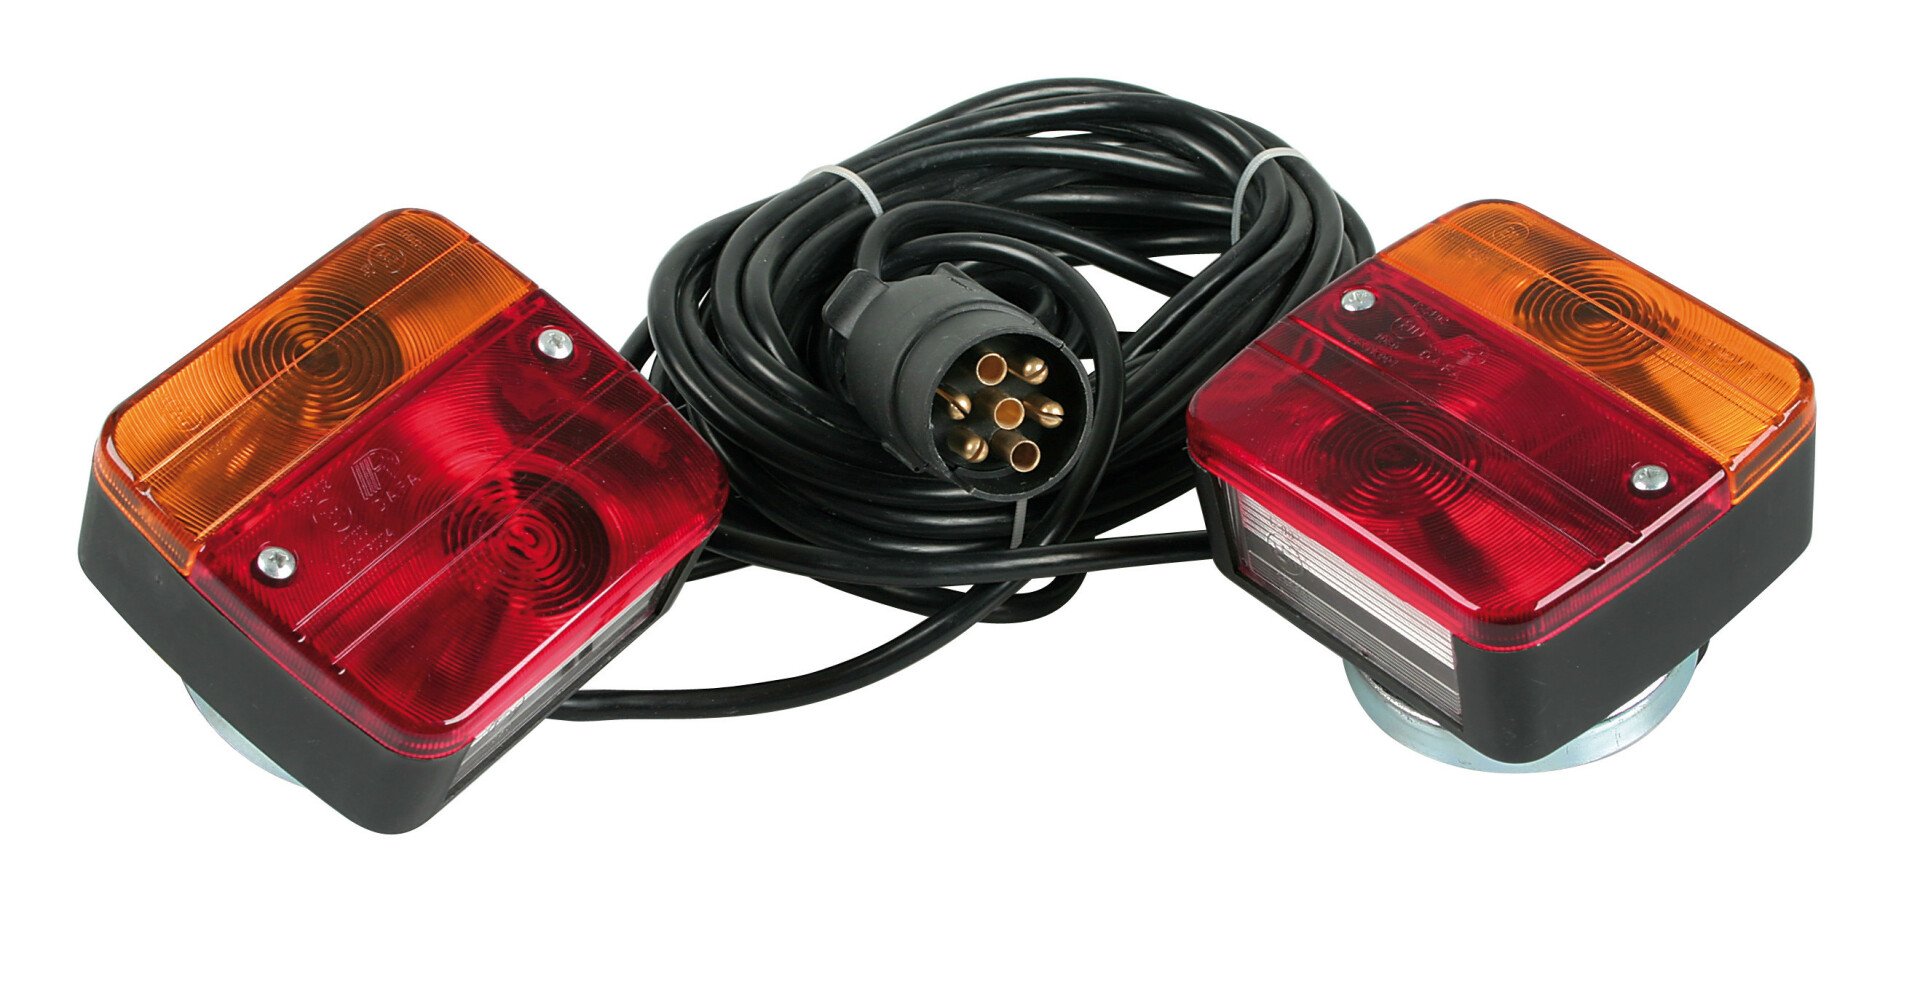 Pronto-fari, magnetic pre-wired trailer lights wiring set, 12V thumb